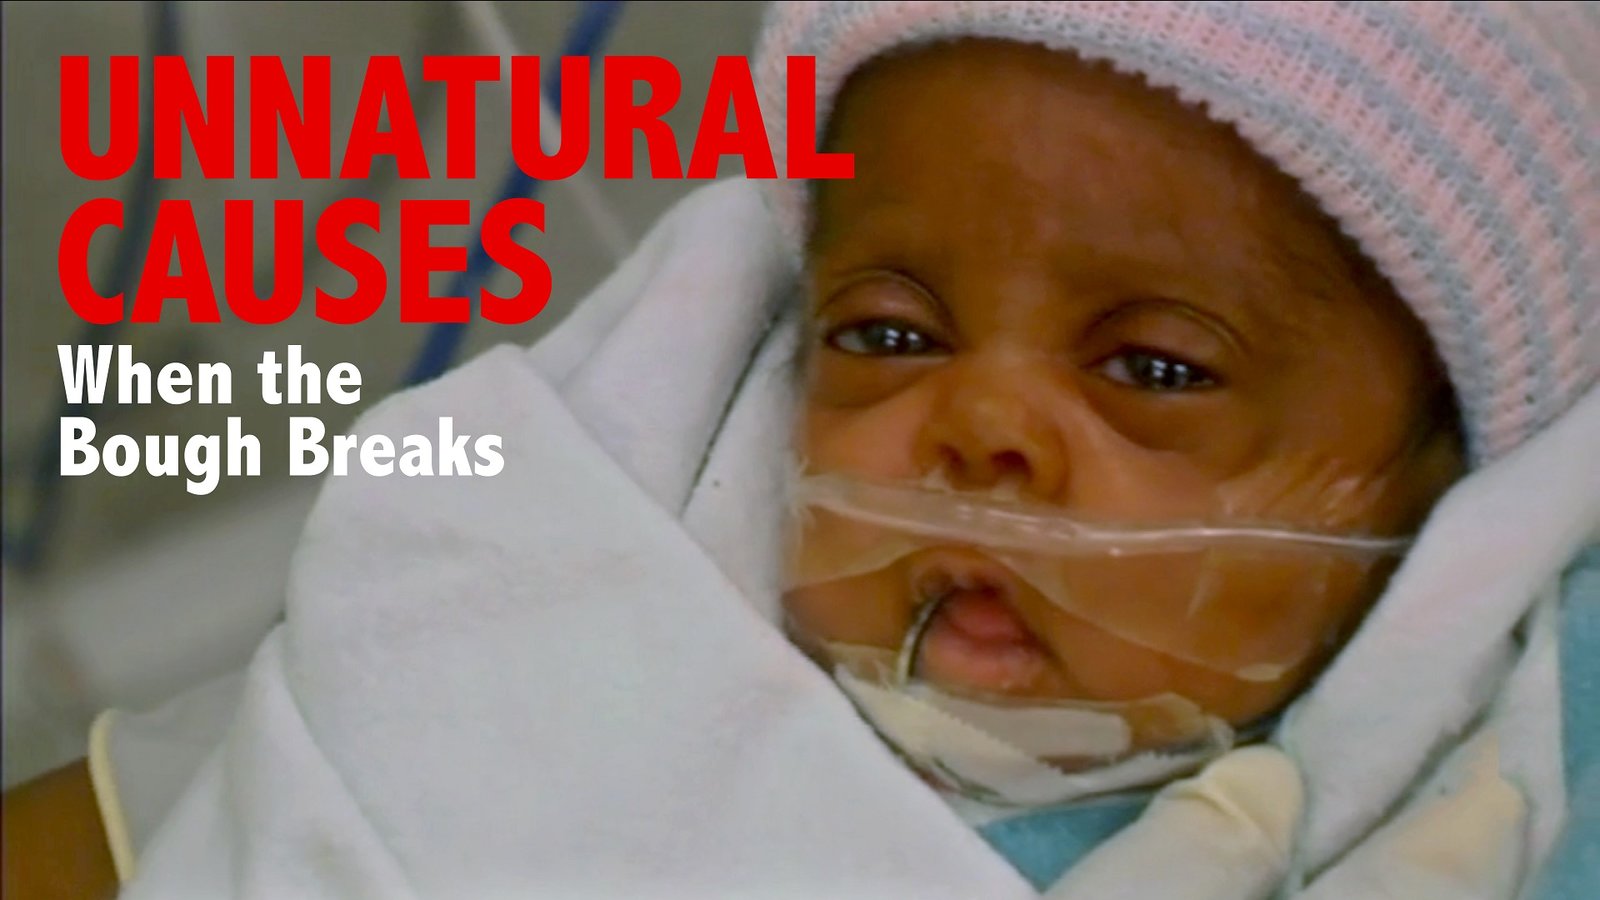 Unnatural Causes: When the Bough Breaks thumbnail